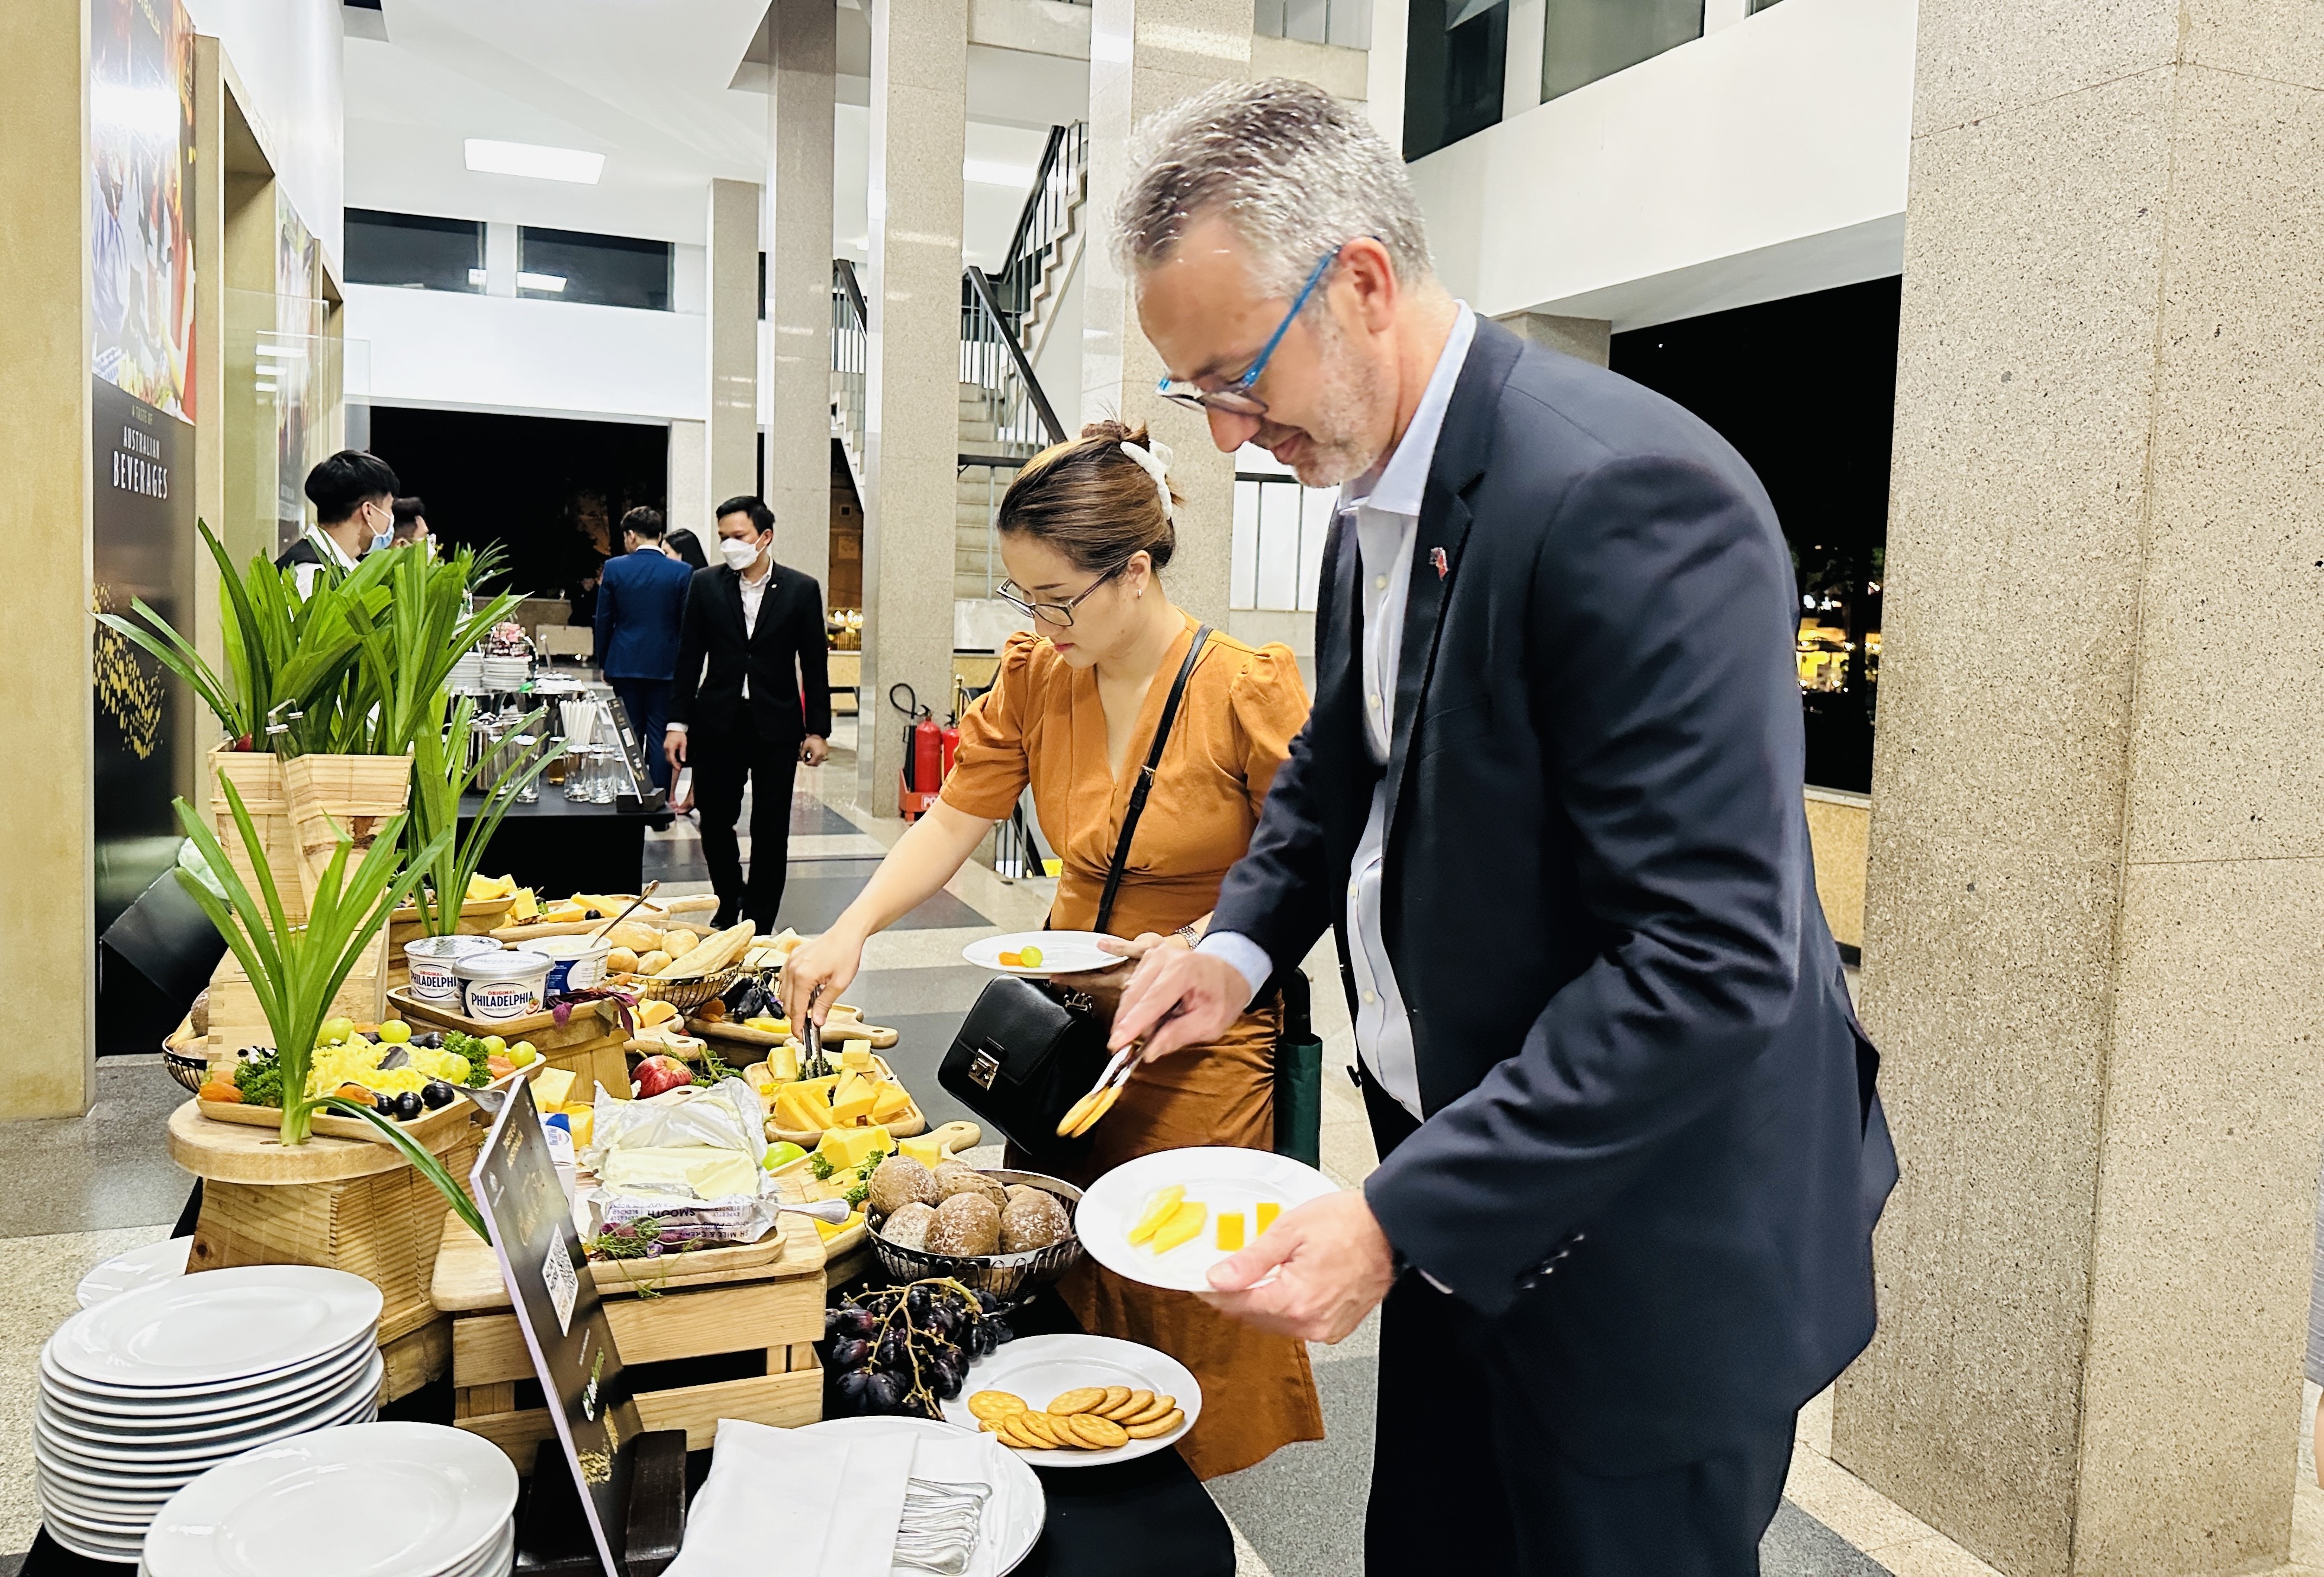 Guests sample Australian cheese at Taste of Australia 2023 at the Independence Palace on May 18, 2023. Photo: Tieu Bac / Tuoi Tre News